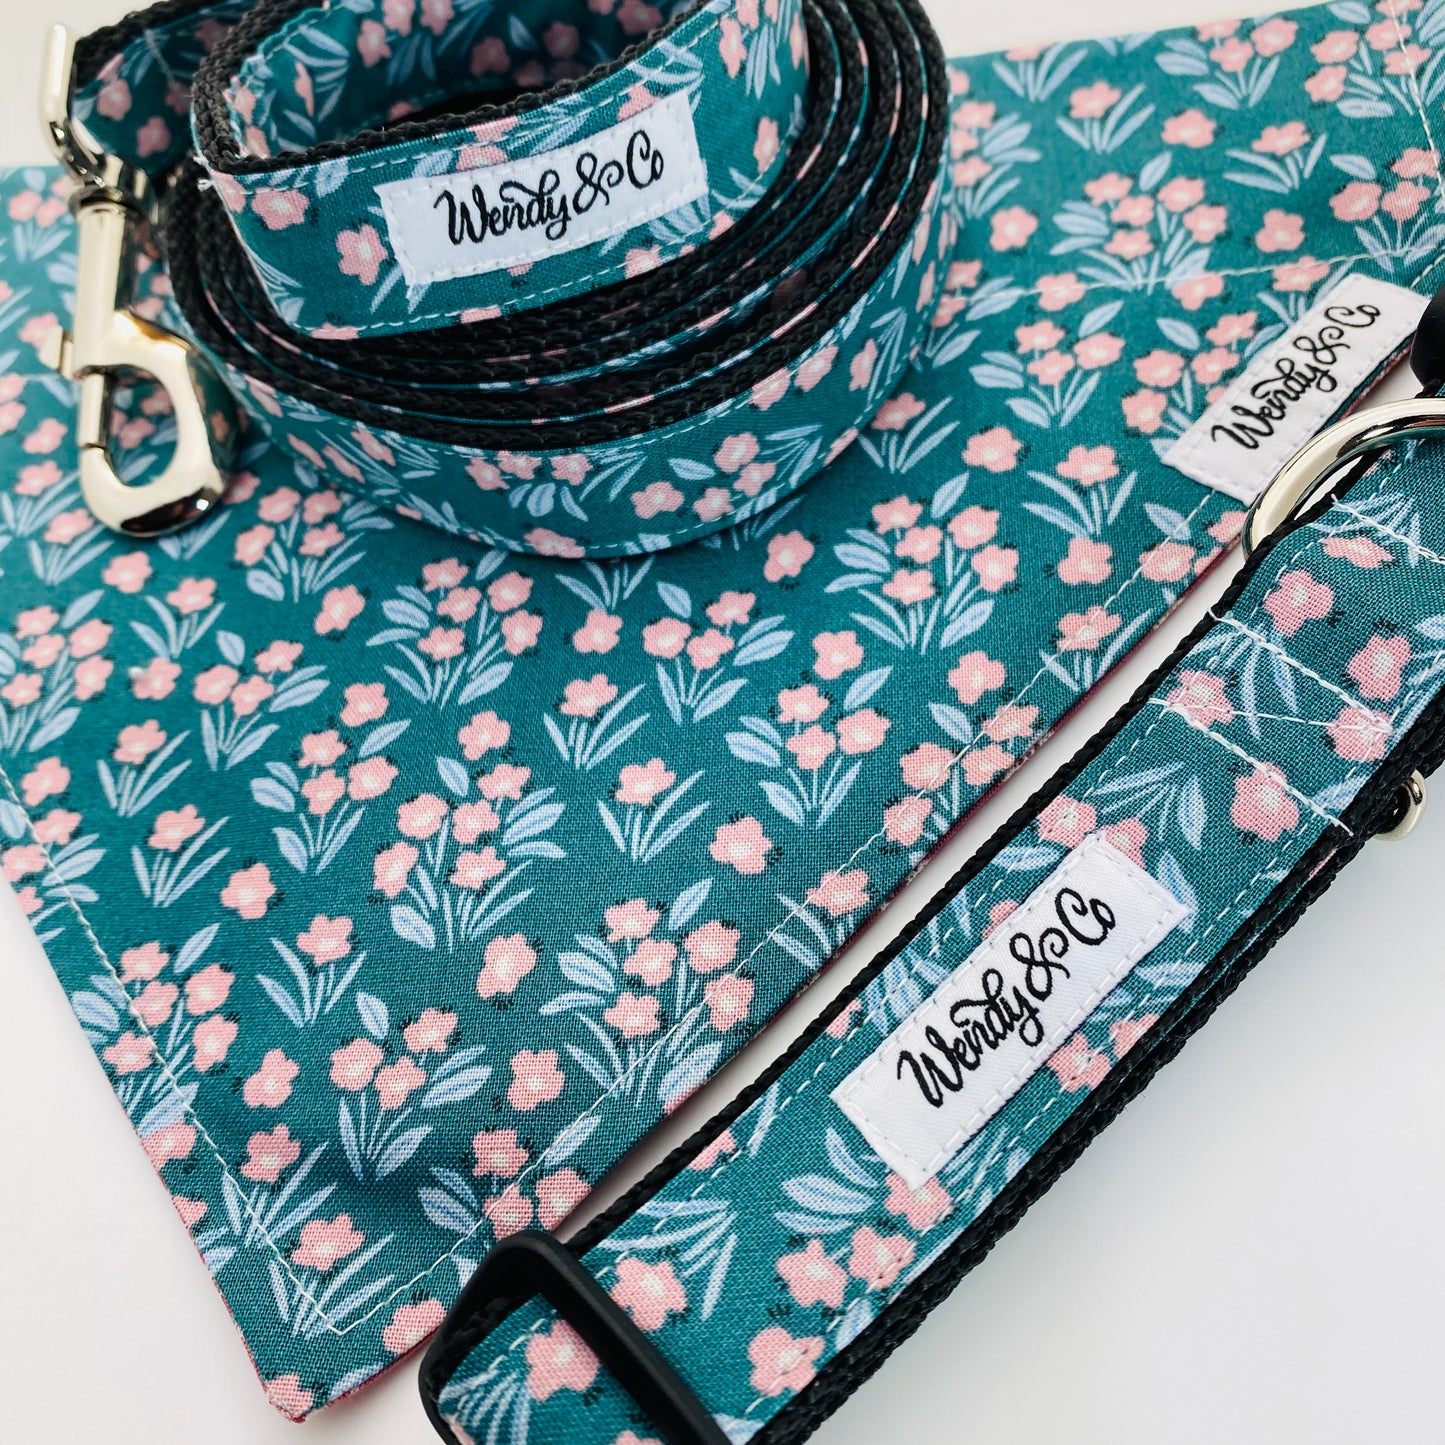 Teal and pink floral dog set with reversible bandana, collar and leash.